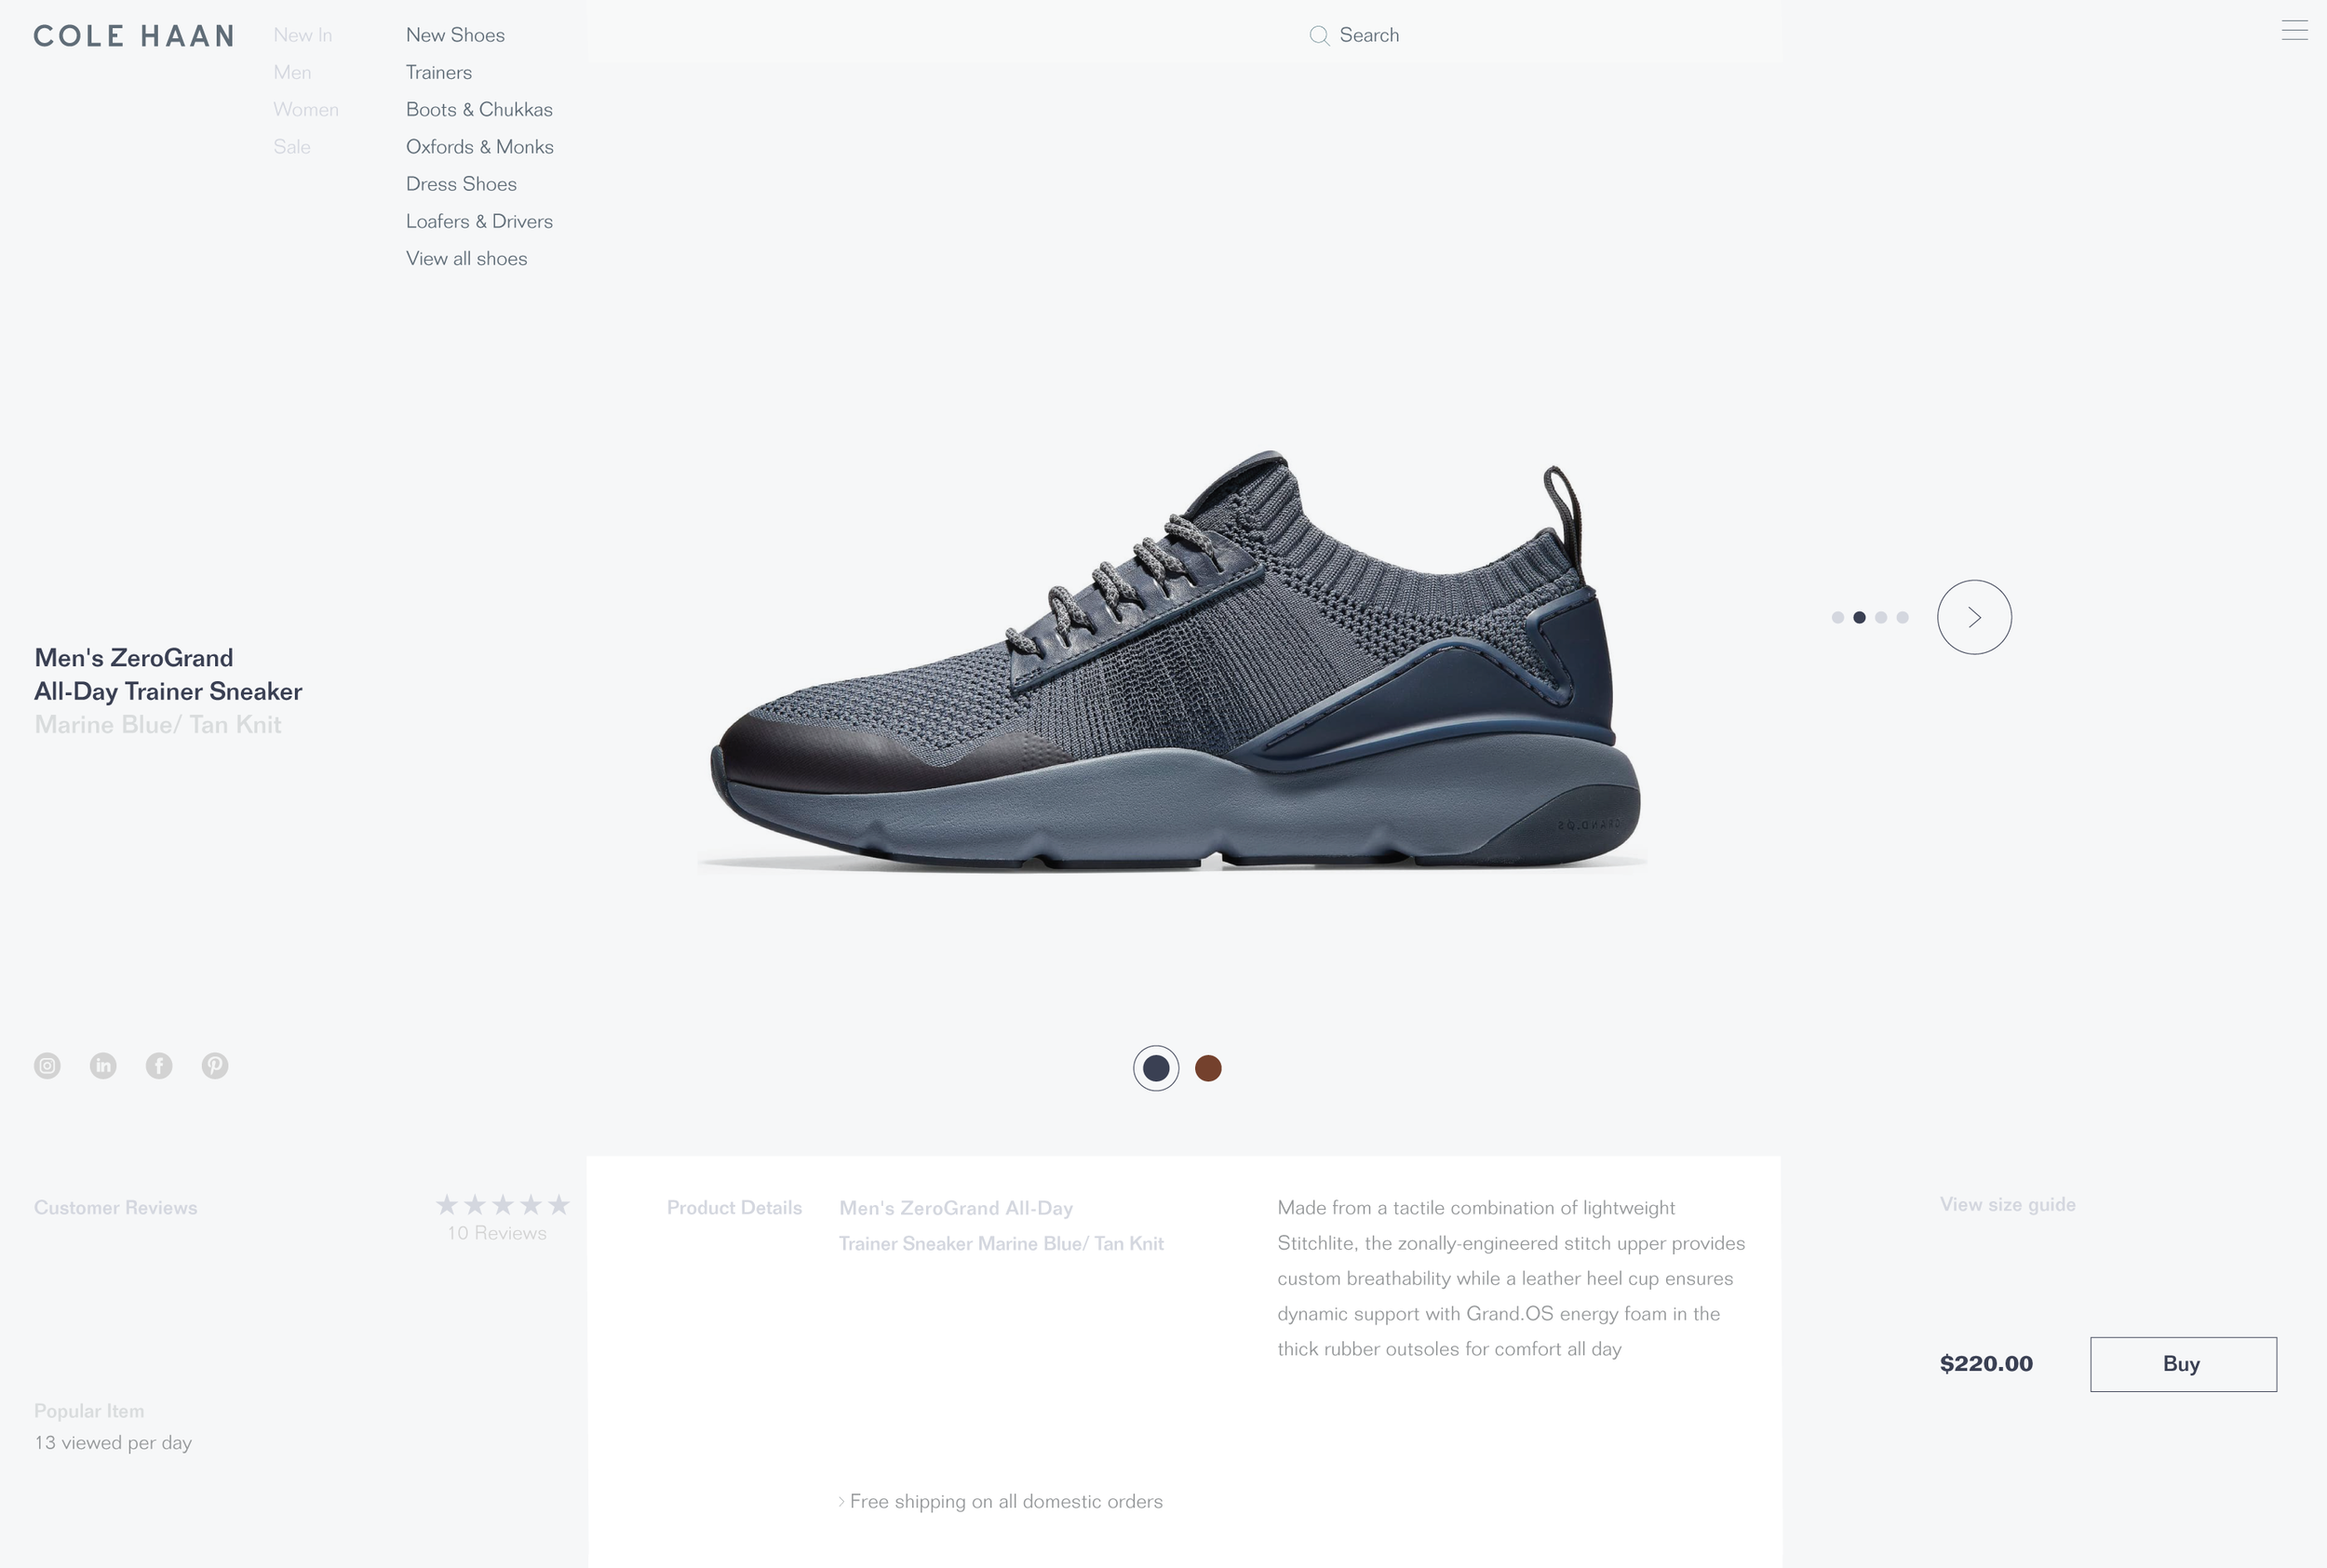 TomTor_Cole_Haan_023.png